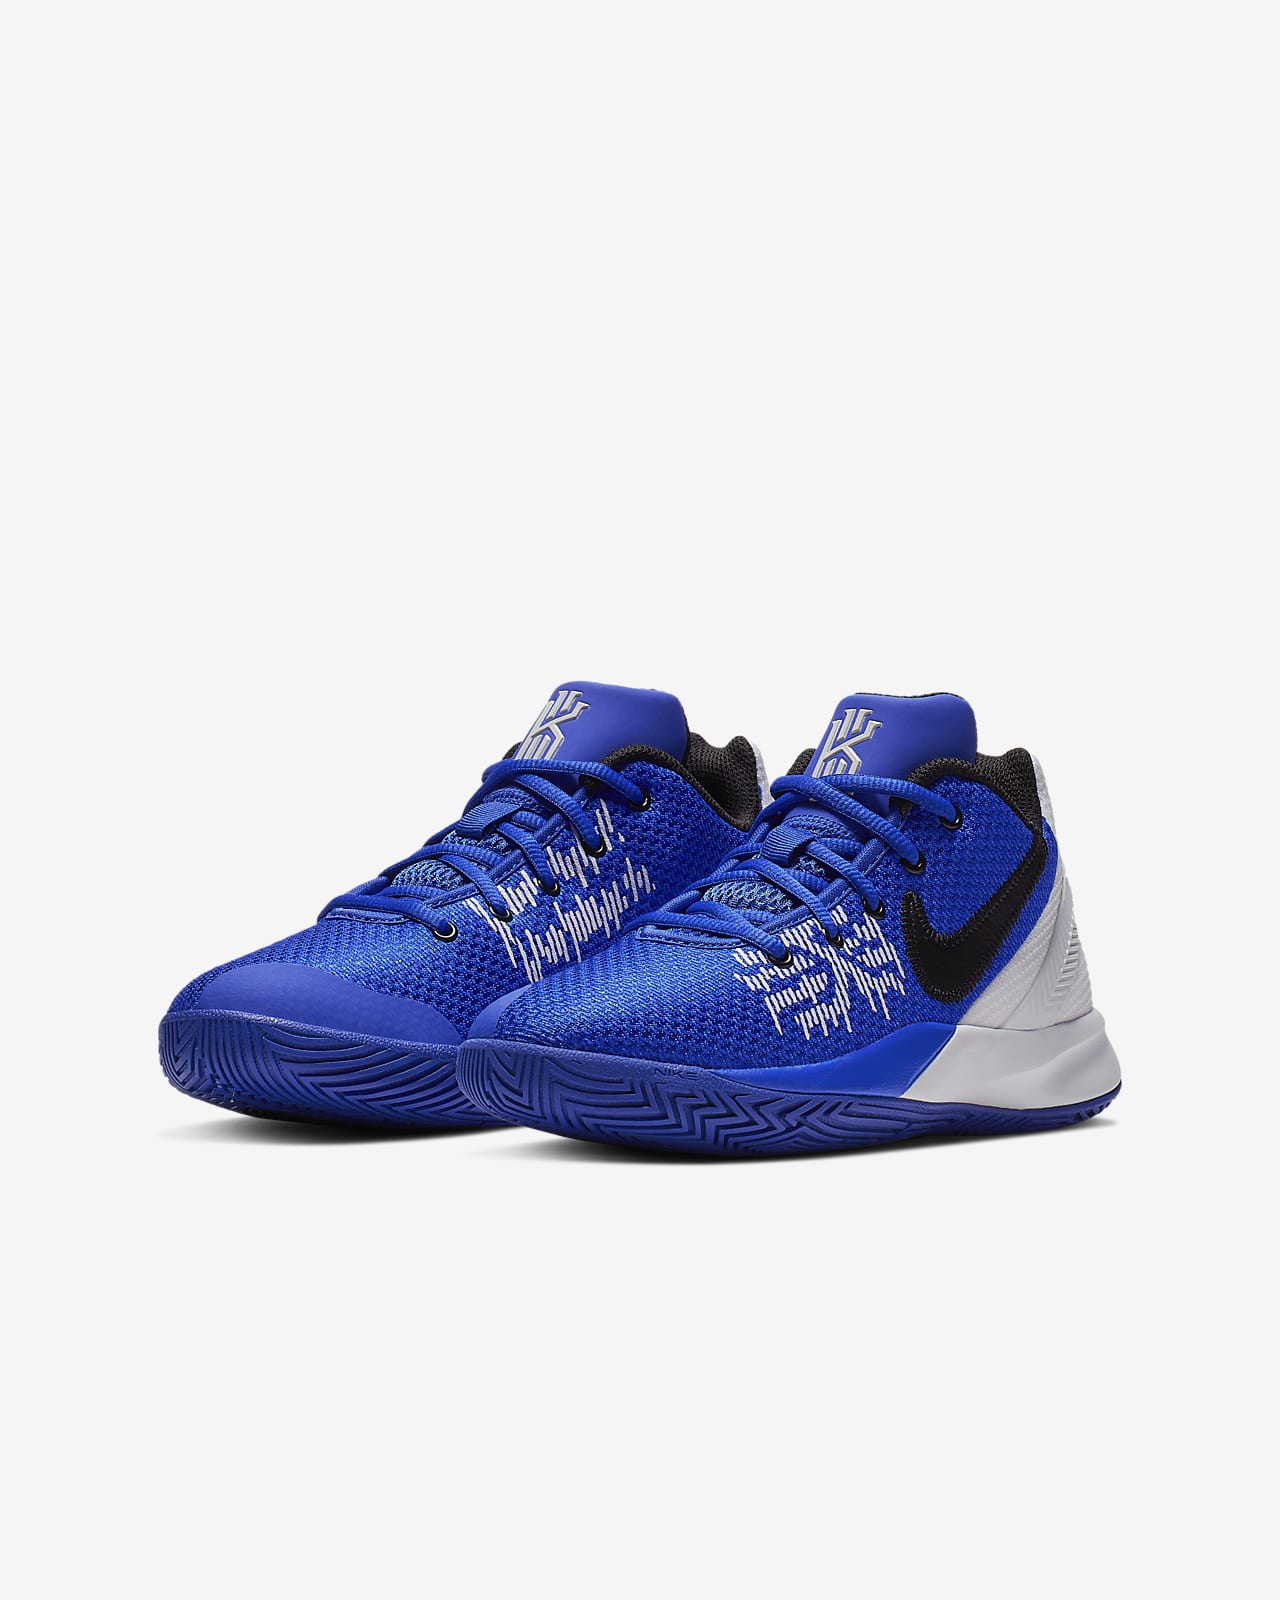 kyrie flytrap 2 youth